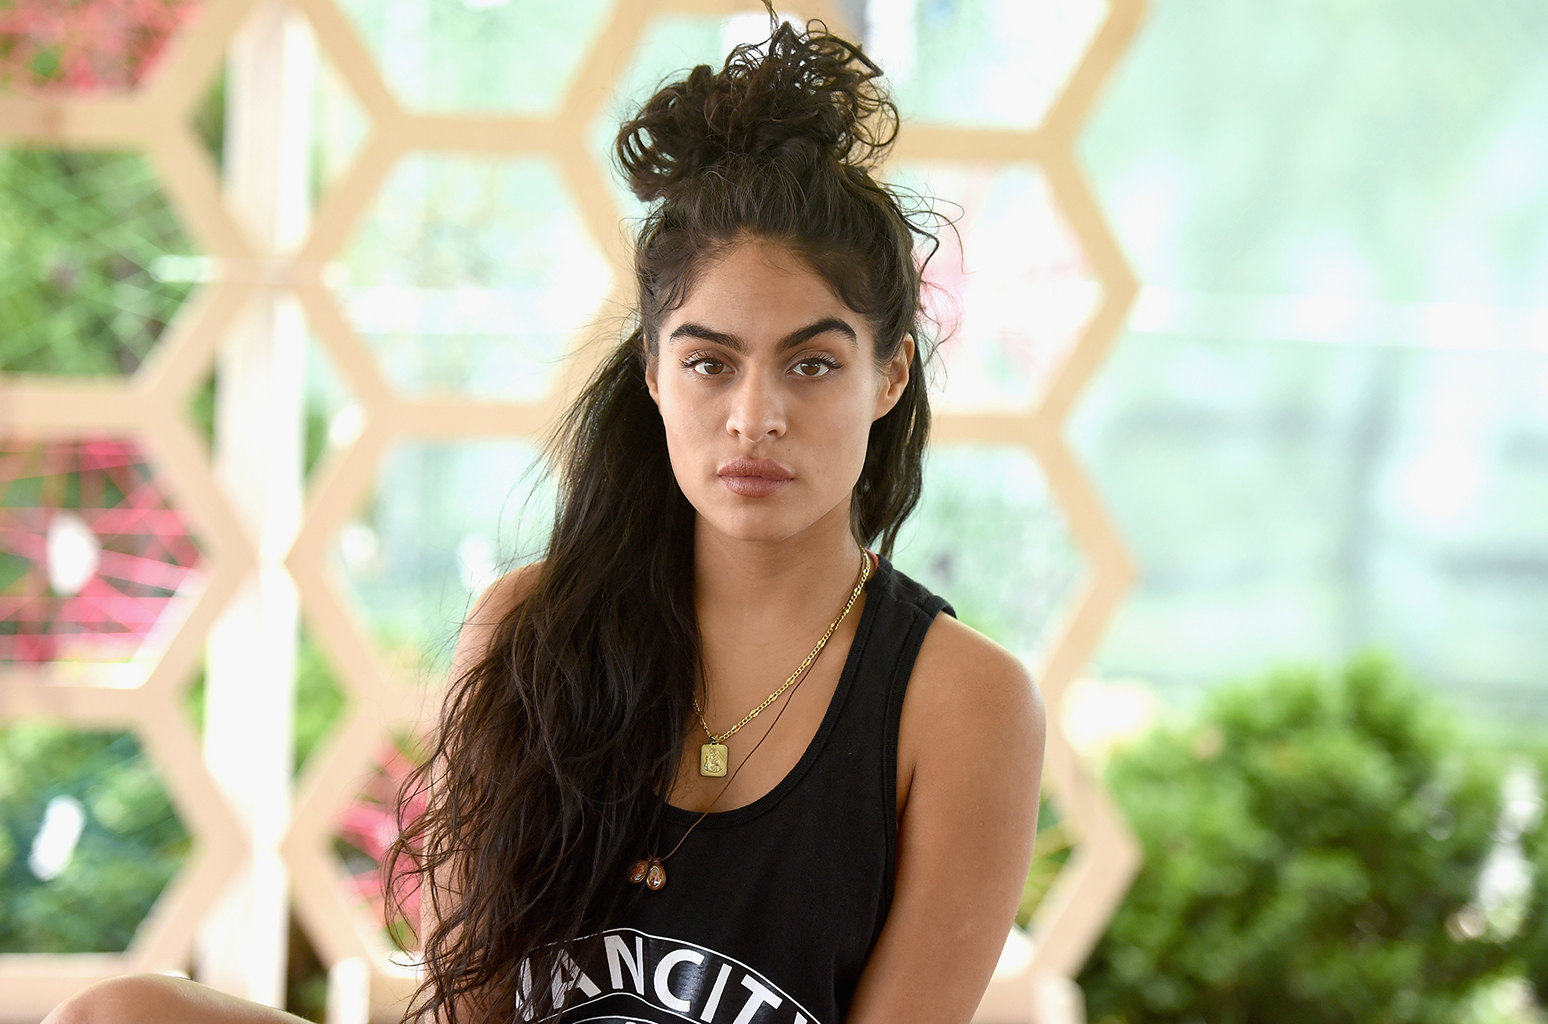 NEW YORK, NY - JUNE 03:  Singer-songwriter Jessie Reyez poses during the 2017 Governors Ball Music Festival - Day 2 at Randall's Island on June 3, 2017 in New York City.  (Photo by Noam Galai/Getty Images)